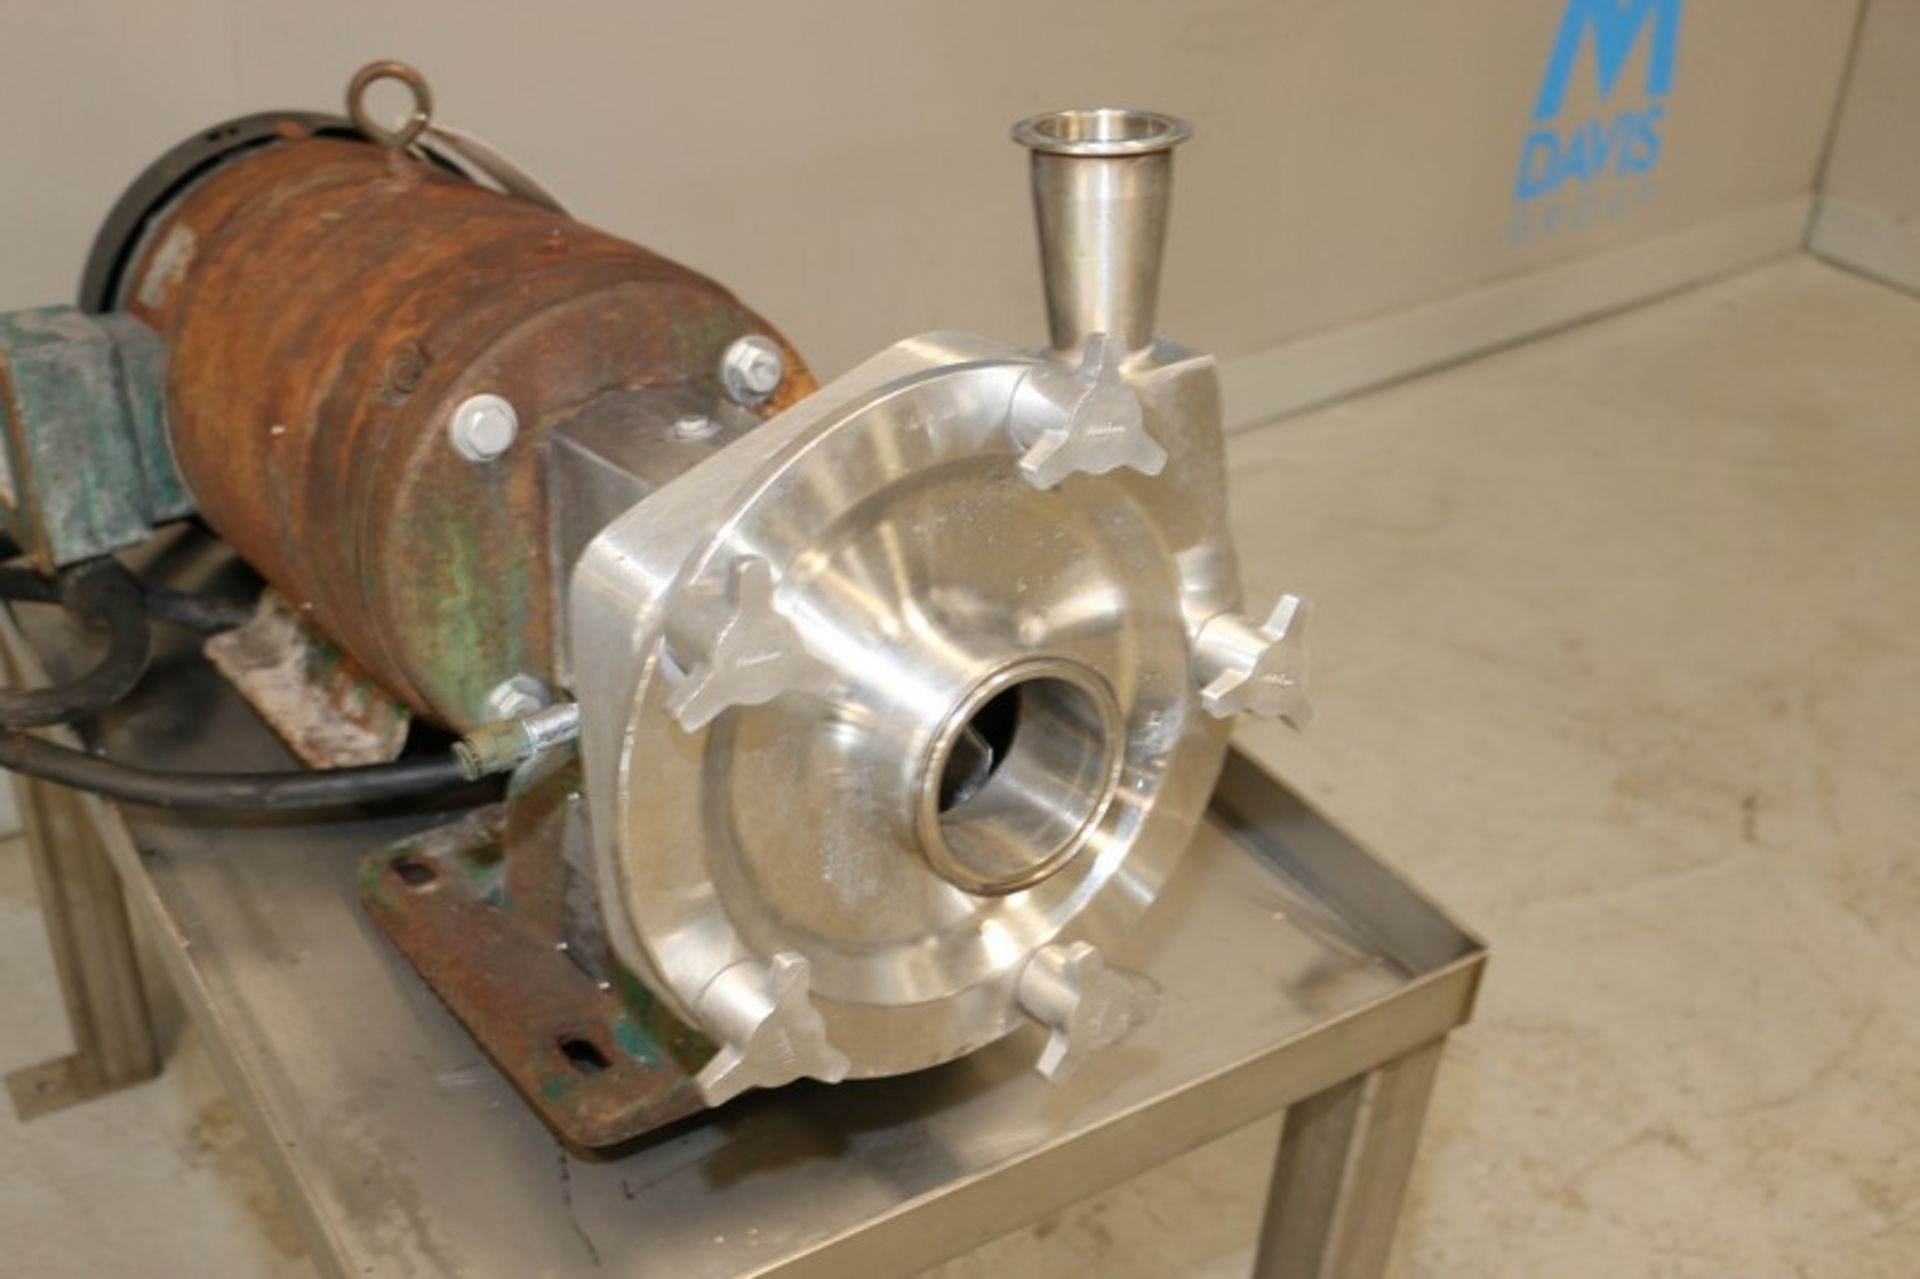 Fristam Aprox. 10 hp Centrifugal Pump, M/N FP1732-165, S/N FP175229739919, with Aprox. 2" x 3" Clamp - Image 4 of 6